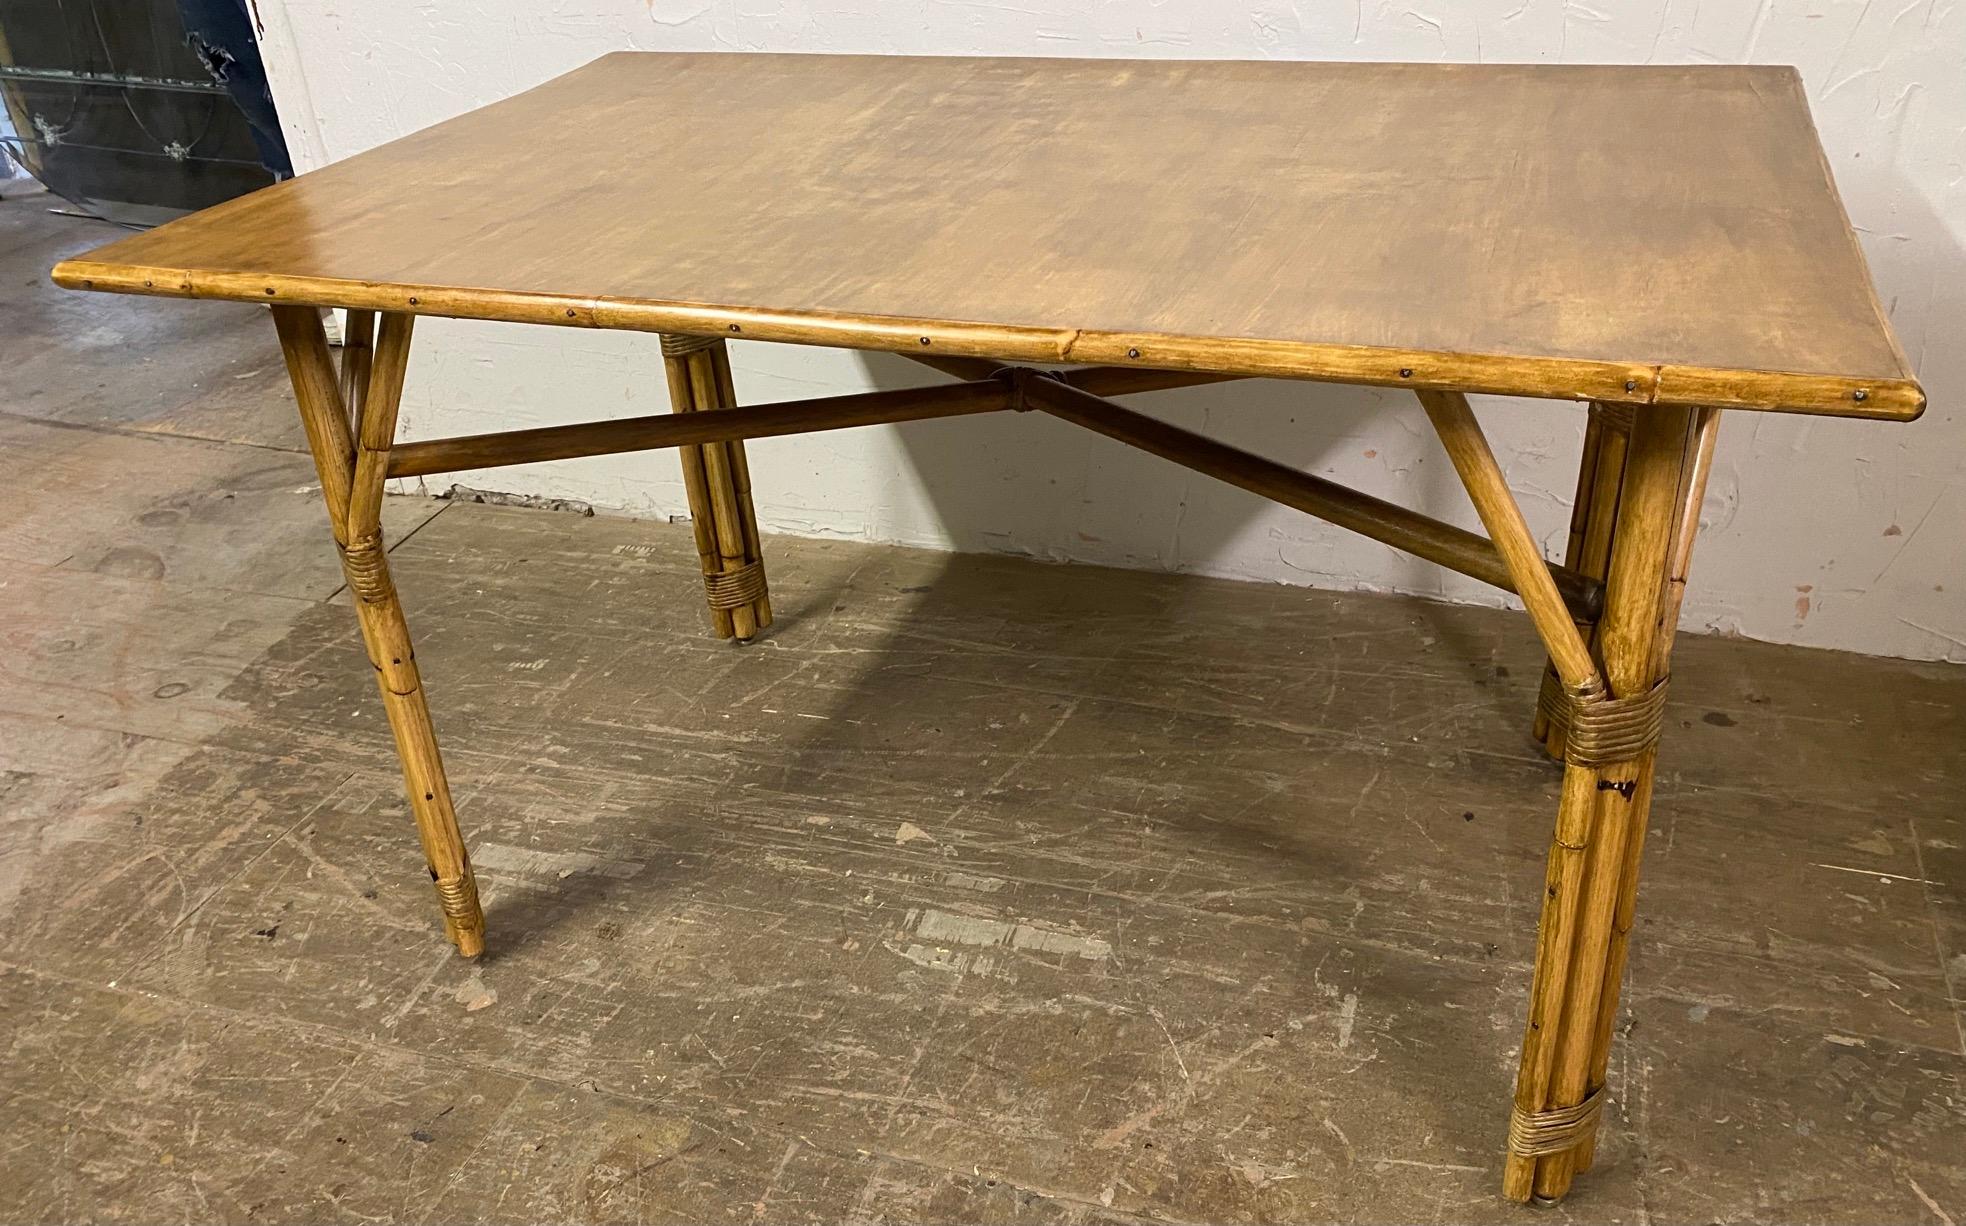 Mid-century 1950's French bamboo desk or dining table.
Wicker, rattan, faux bamboo.